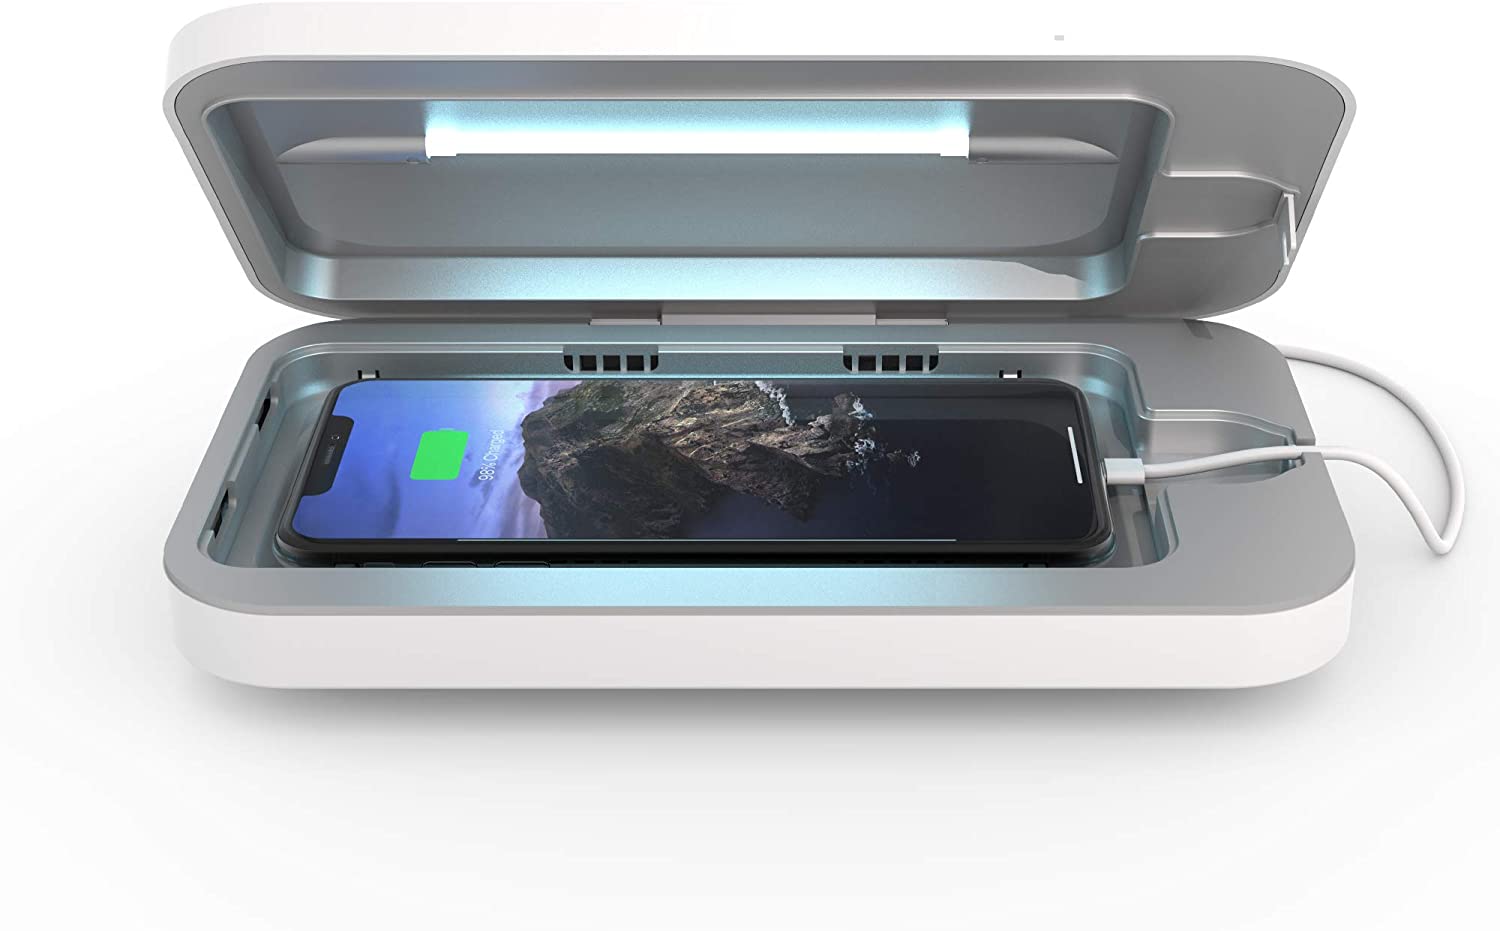 PhoneSoap Cell Phone Sanitizer